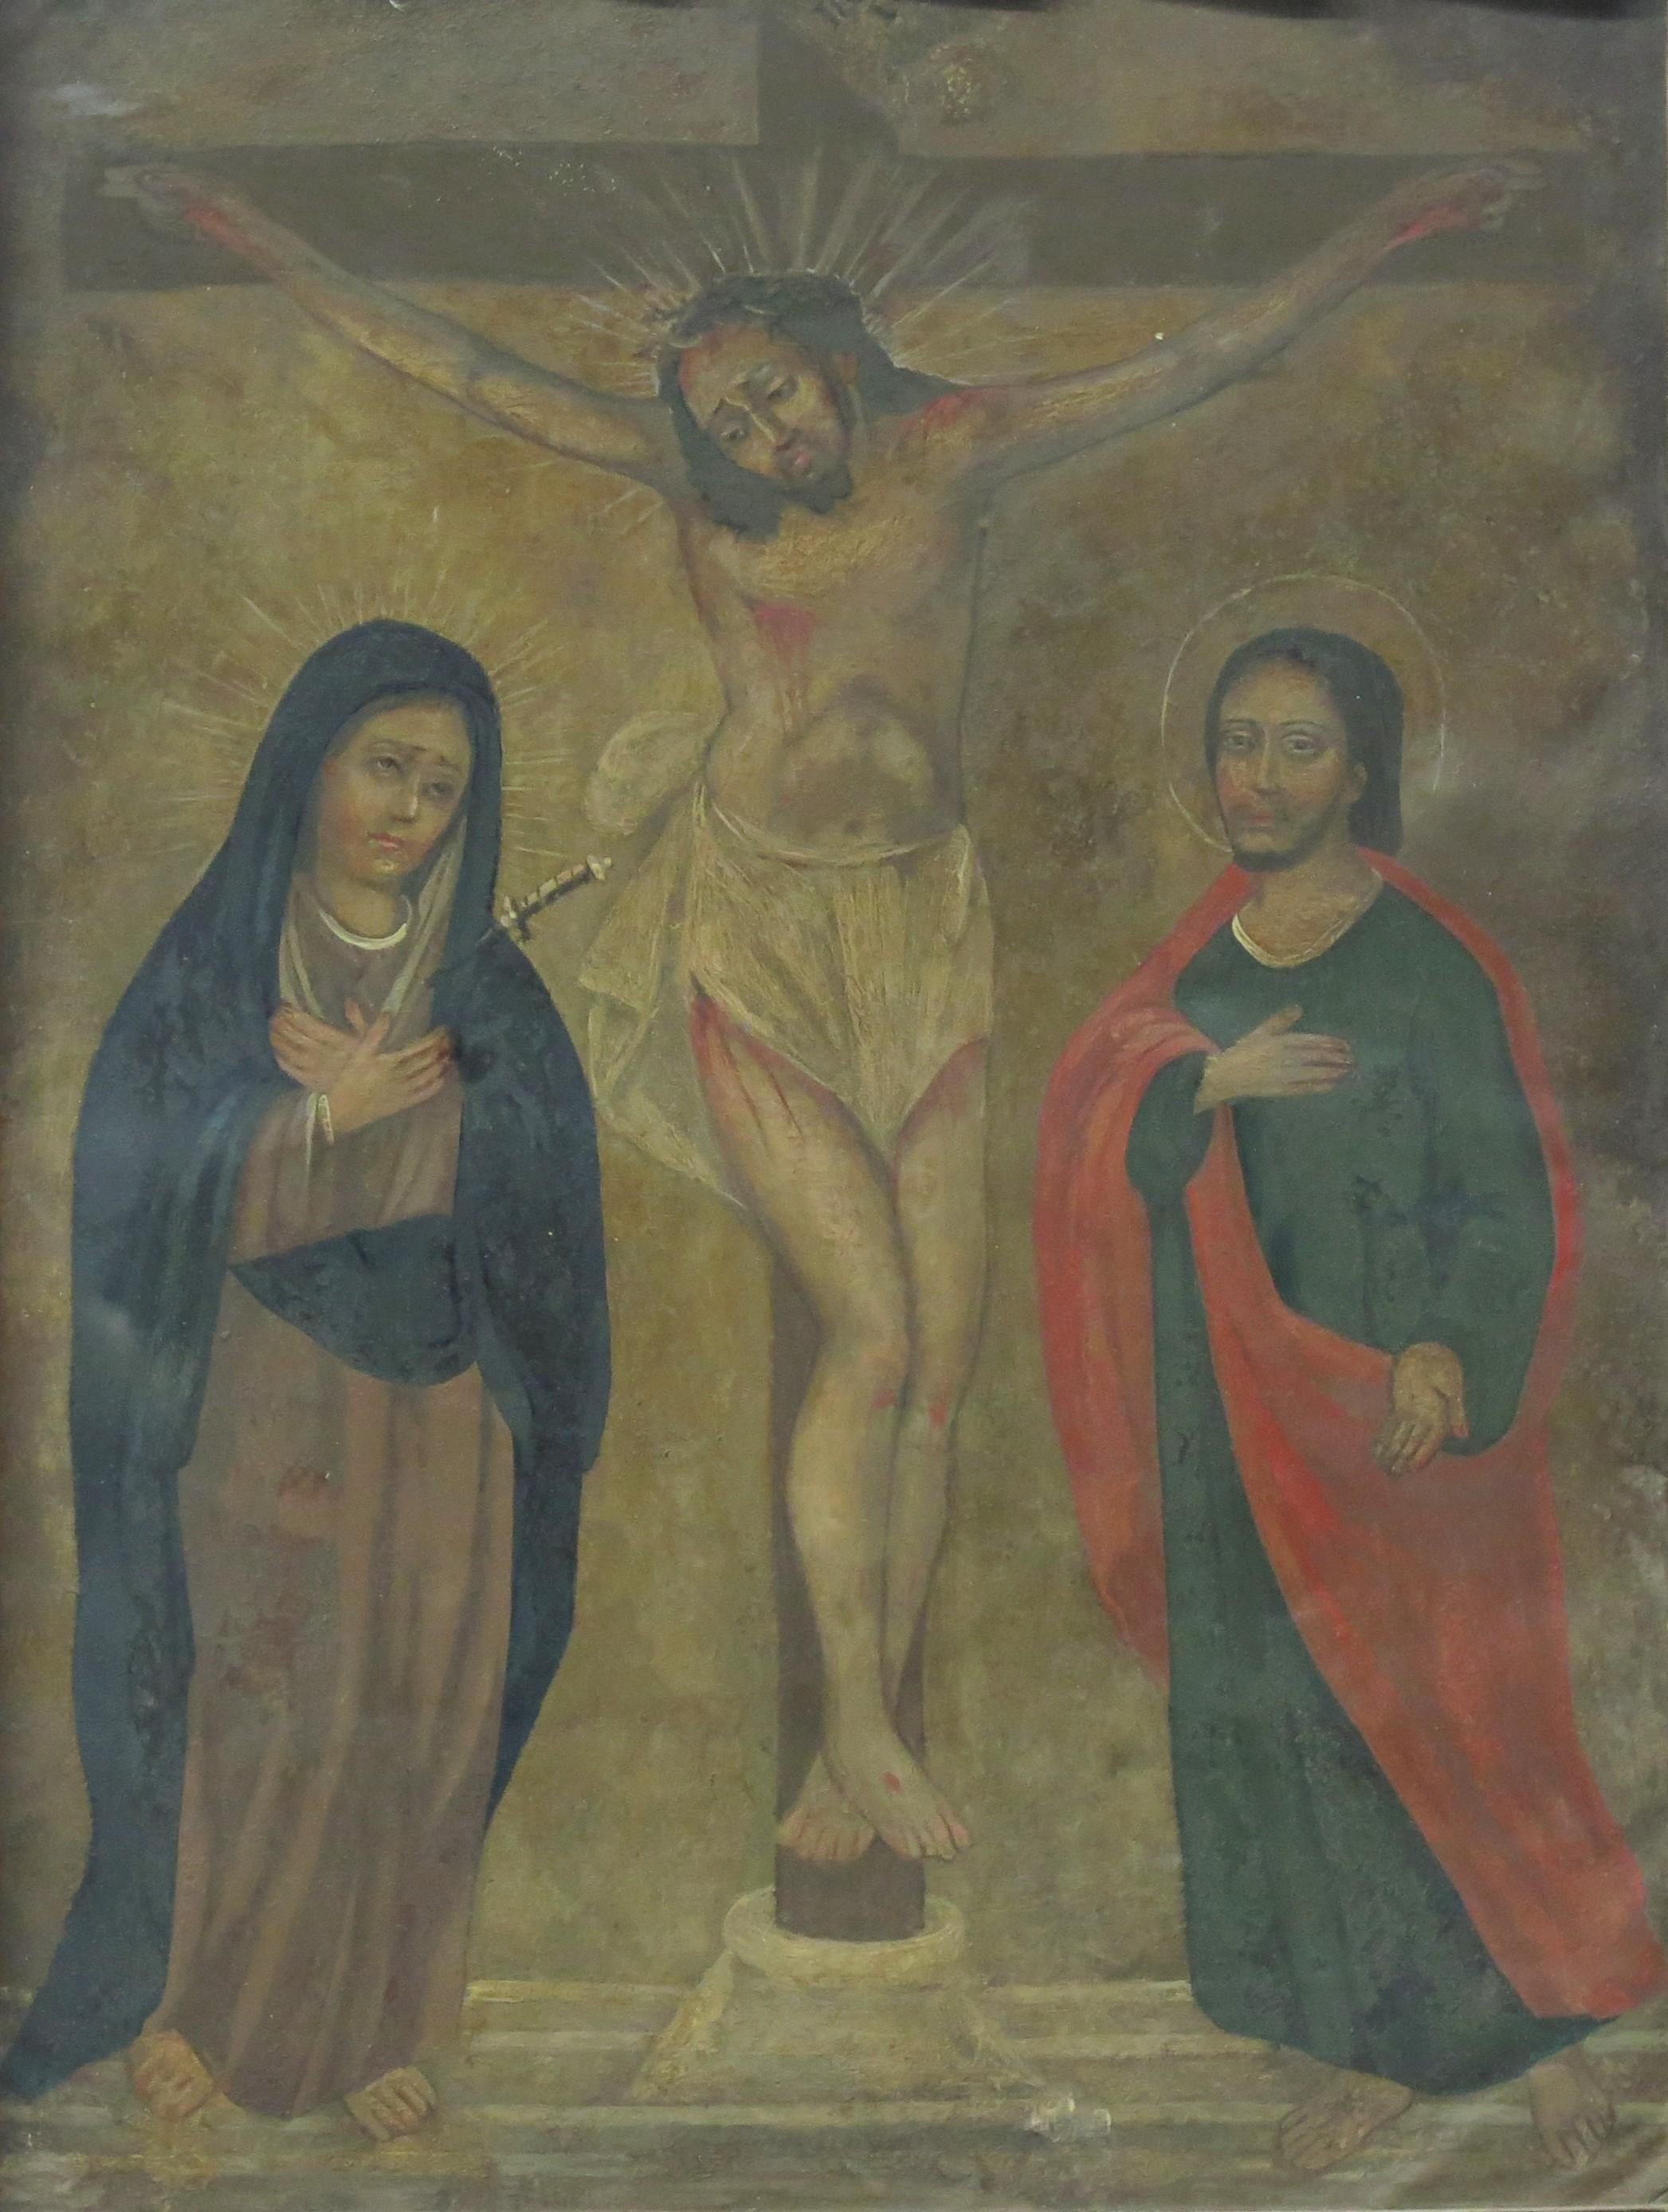 The Crucifixion, oil on tin Spanish Colonial retablo, including Mary and Saint John, in a carved wooden frame, The Crucifixion is a central part of the Passion of Christ as it is the pivotal moment when Jesus makes the ultimate sacrifice for the